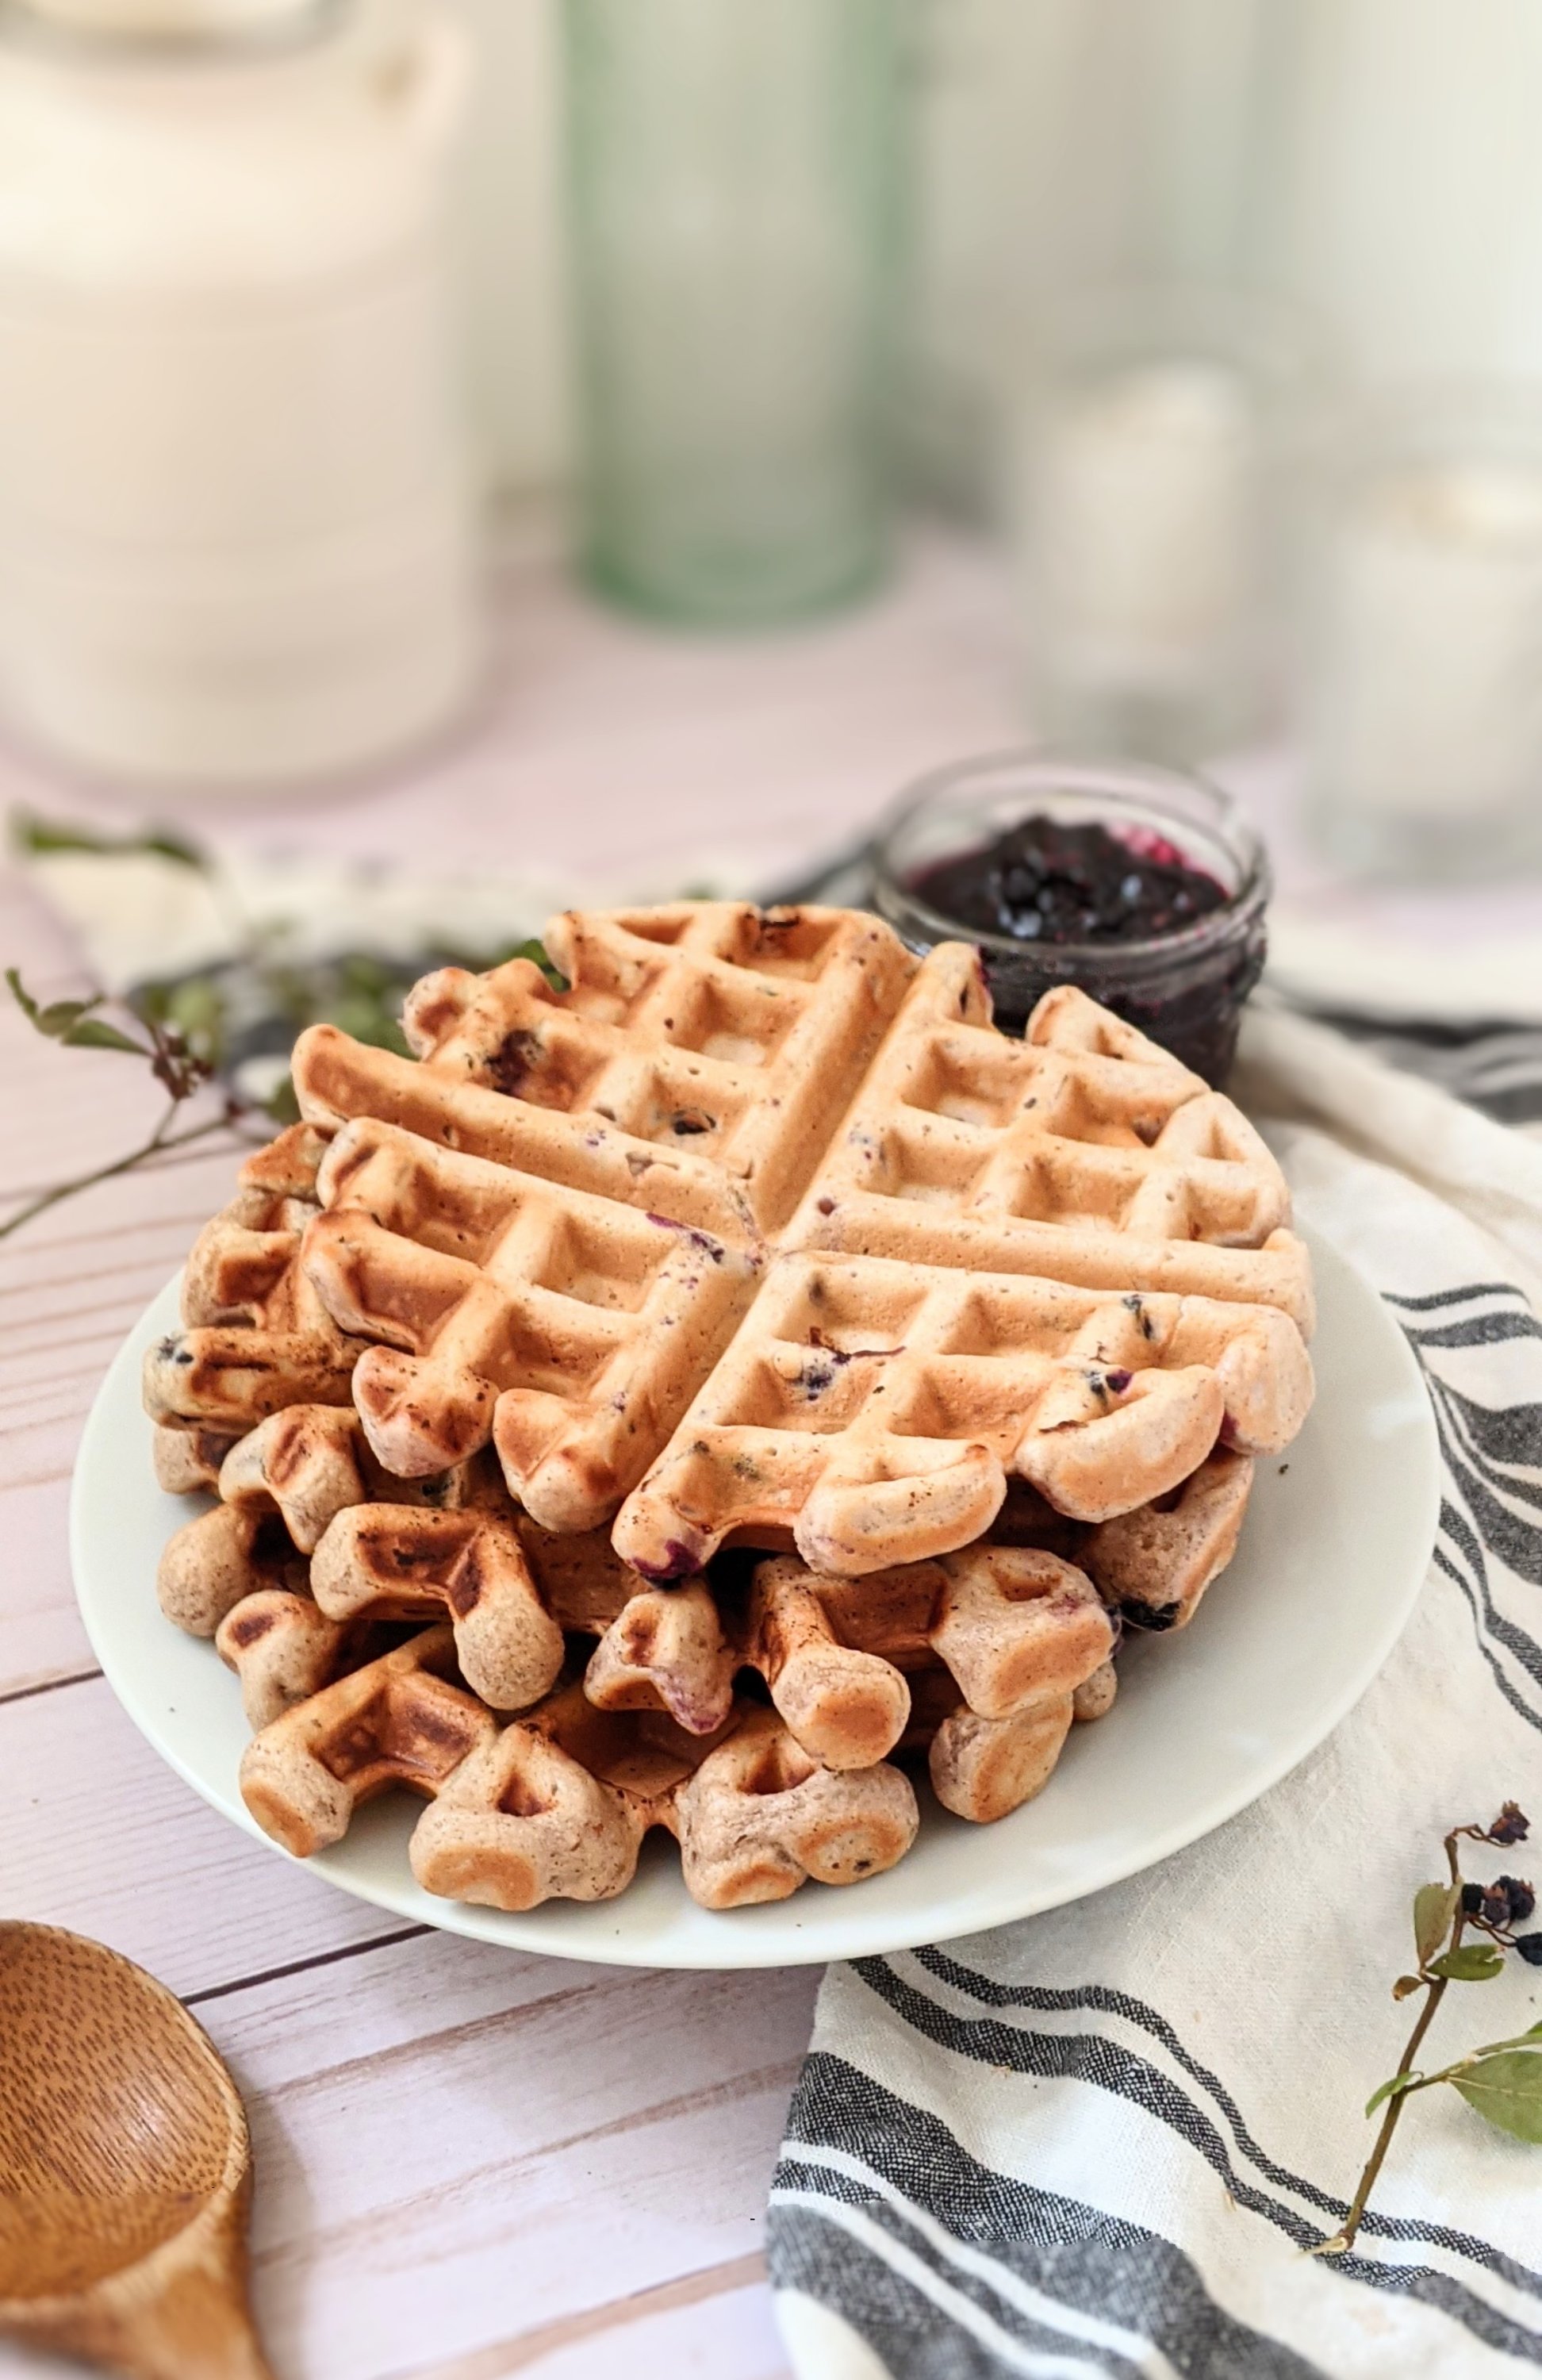 plant based Belgian waffles with huckleberries and pancake batter with huckleberries for easy weekend brunch recipes for the family